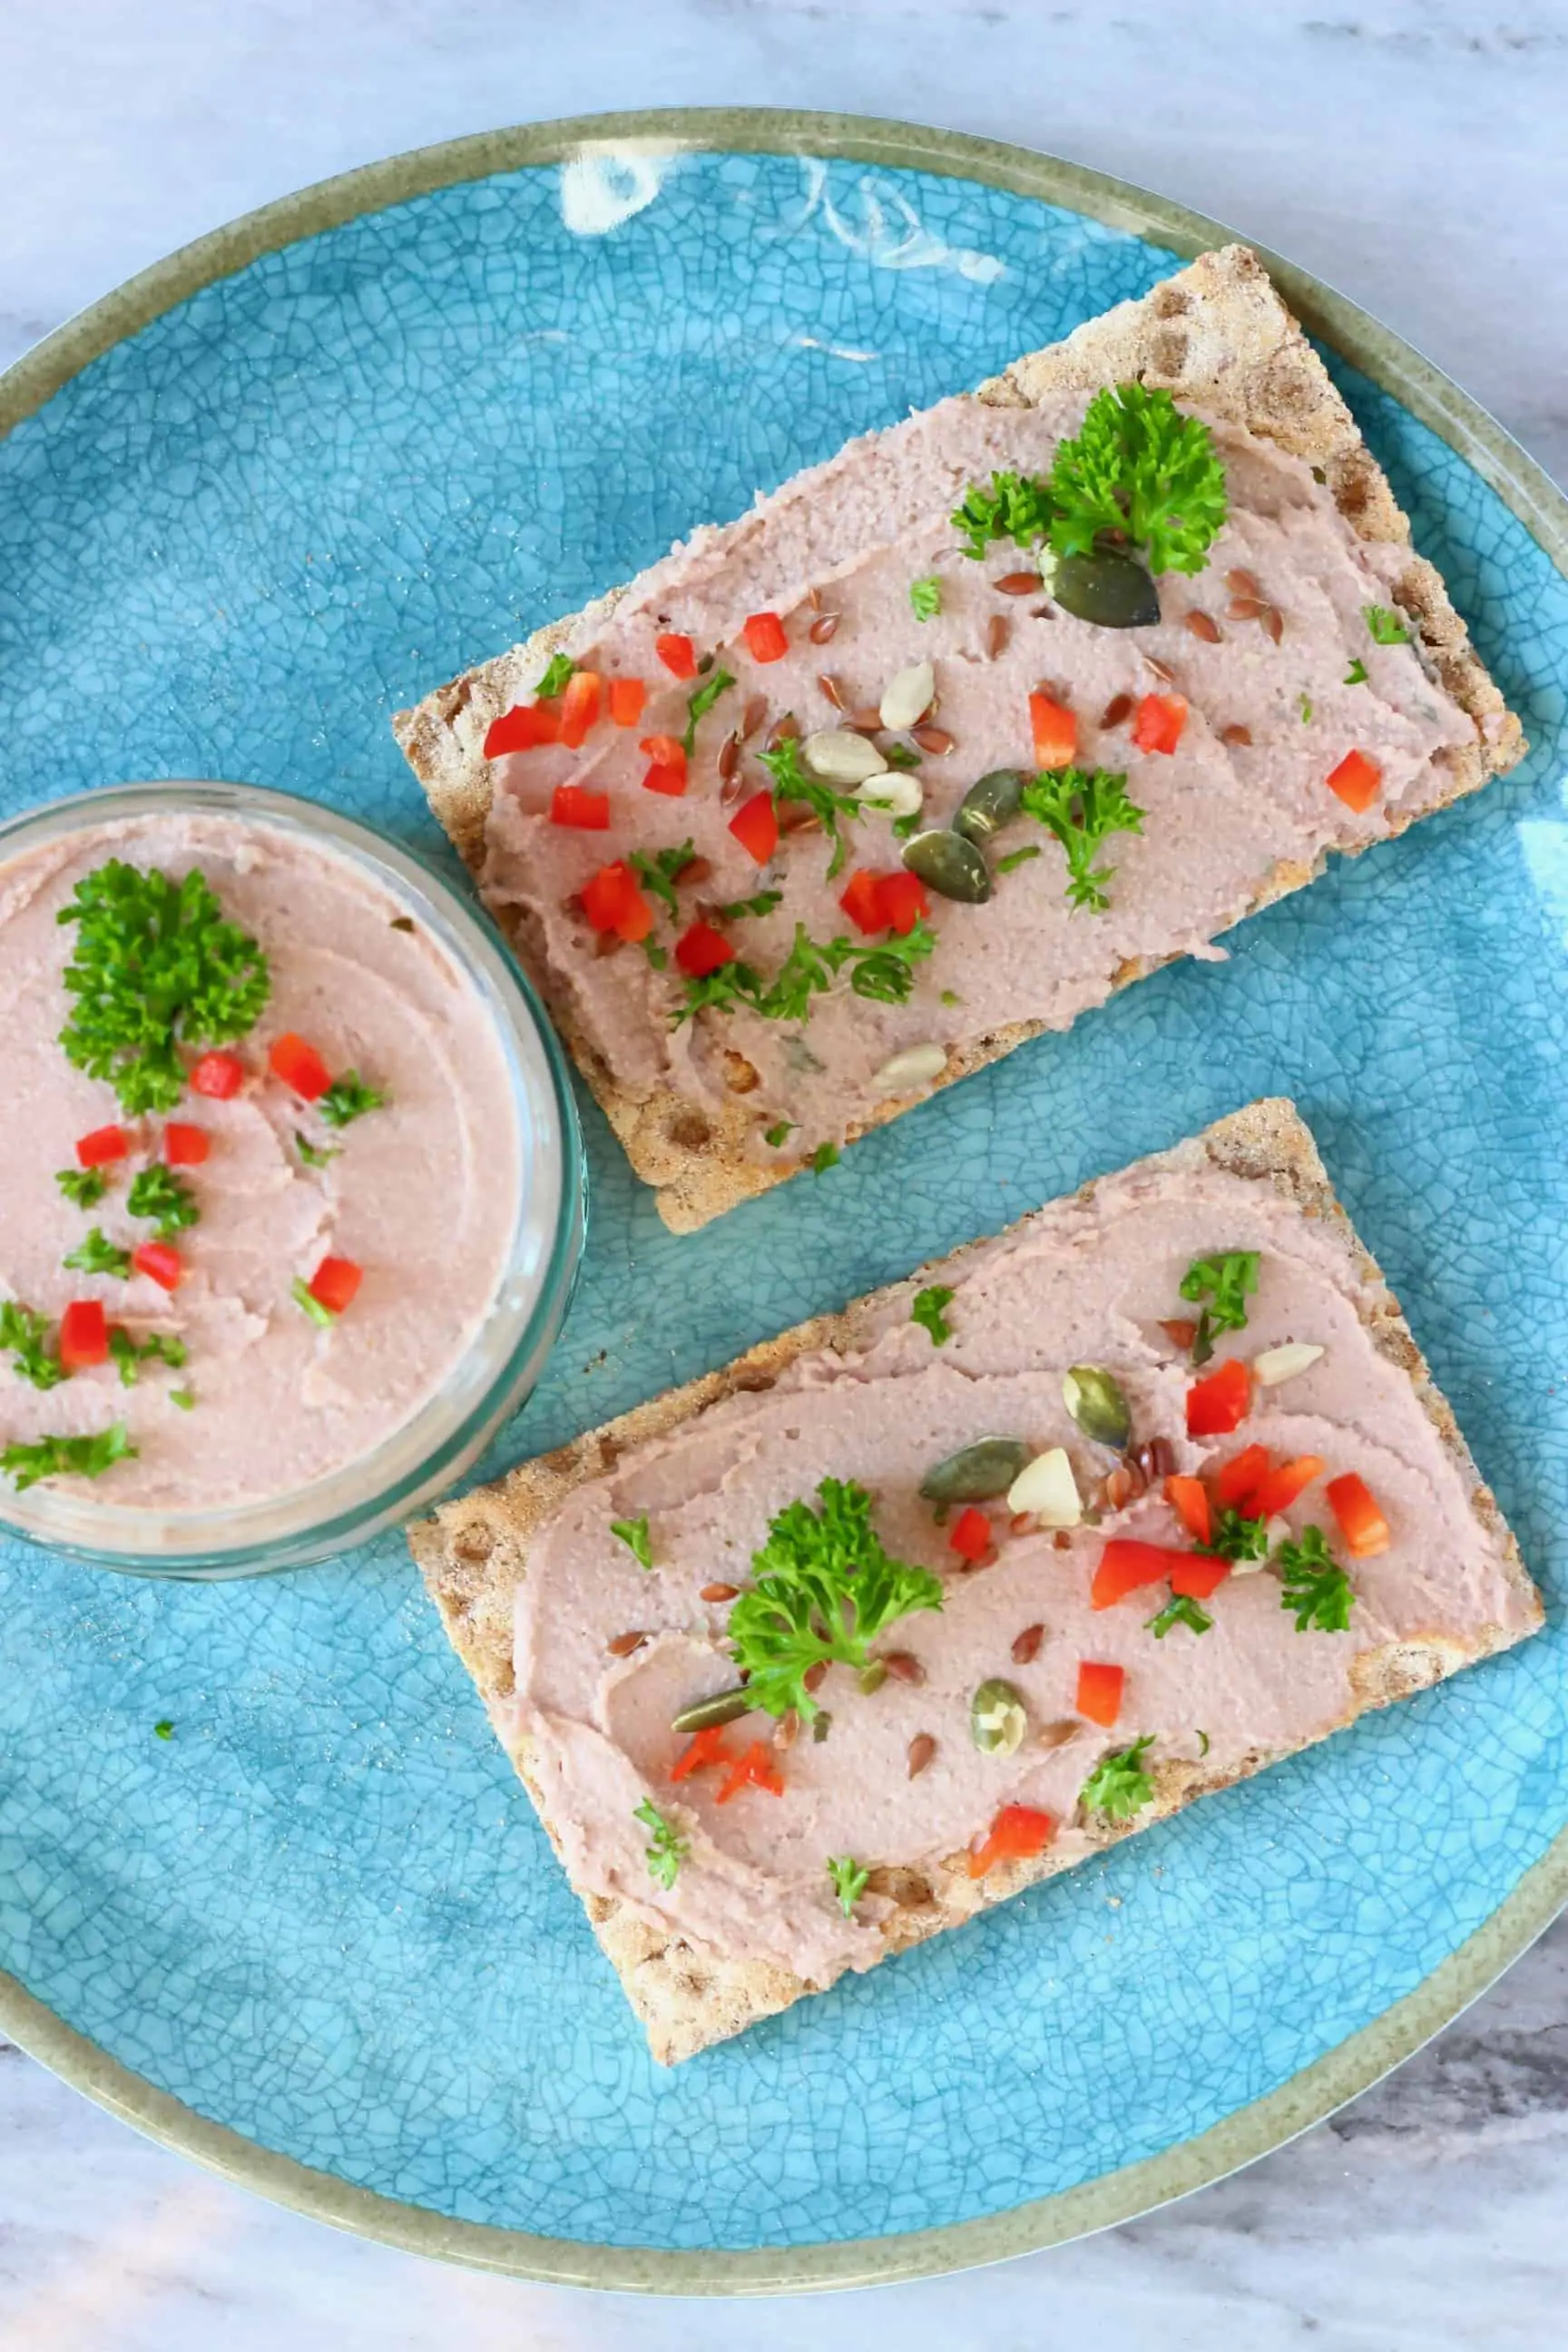 A glass jar filled with vegan mushroom pâté topped with herbs on a blue plate with two rectangular crackers spread with pâté and decorated with pumpkin seeds, chopped red chilli and green herbs